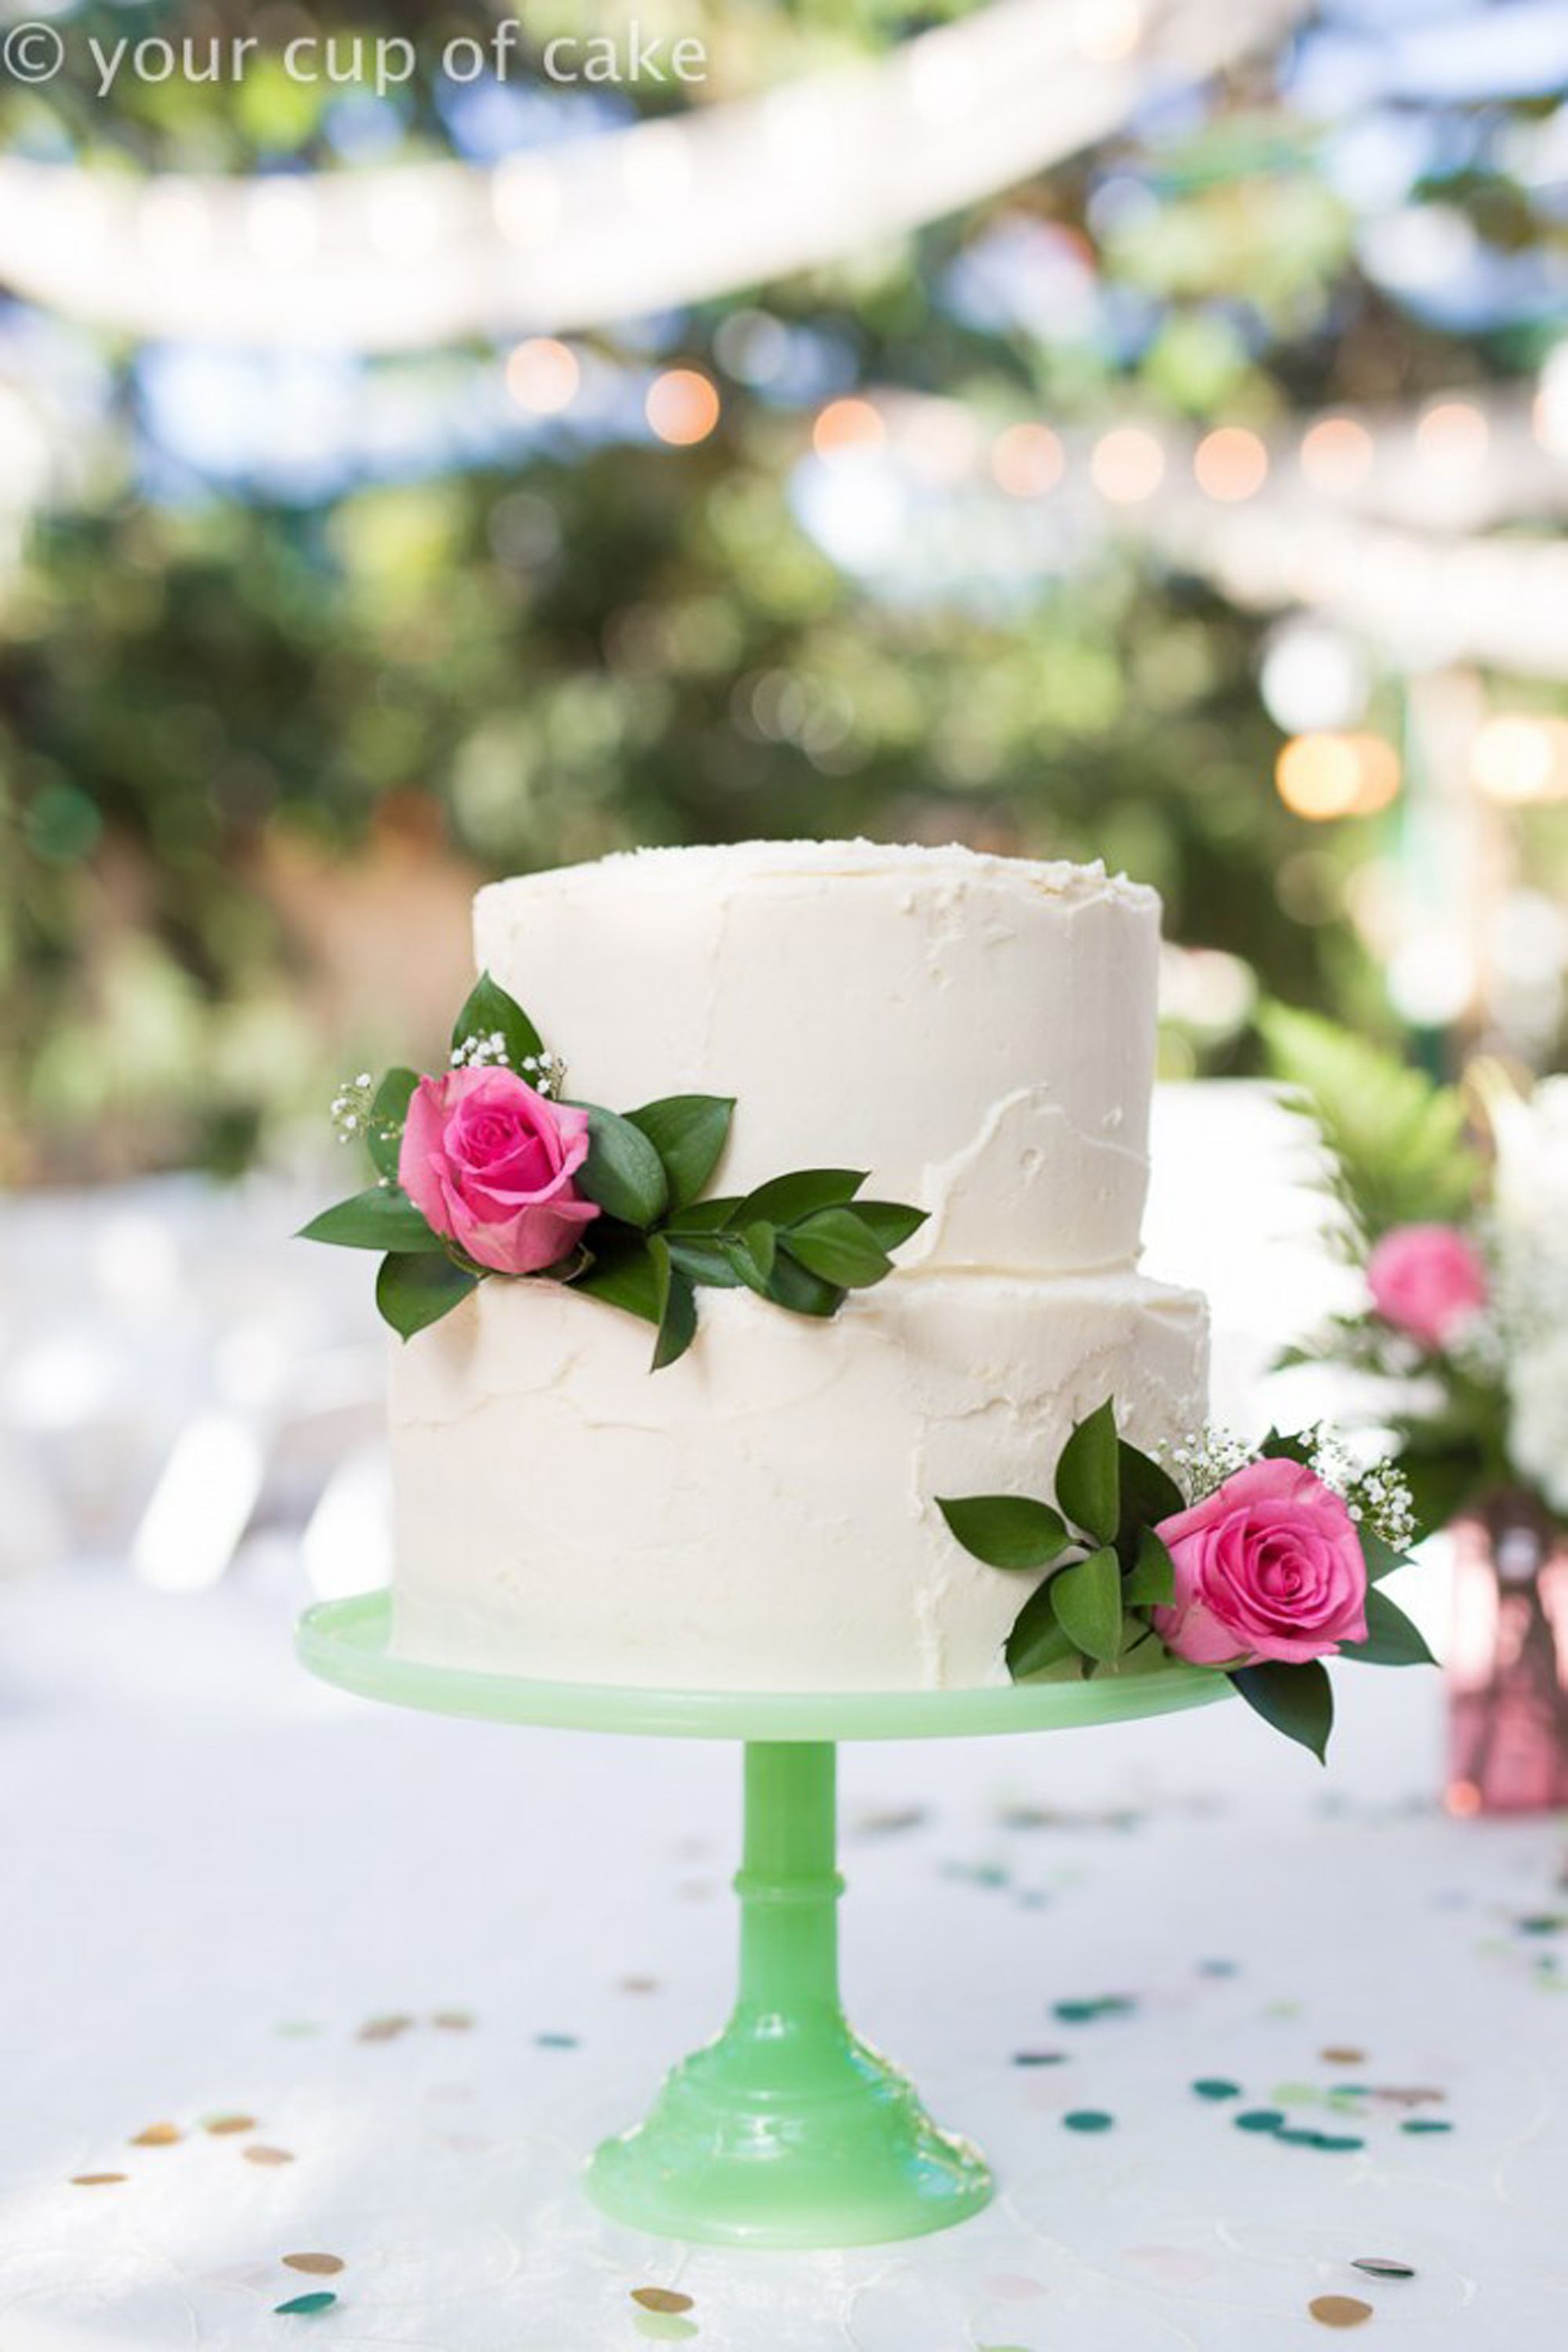 Why spend thousands when you can fake it? Here's how fake wedding cakes  work | Life